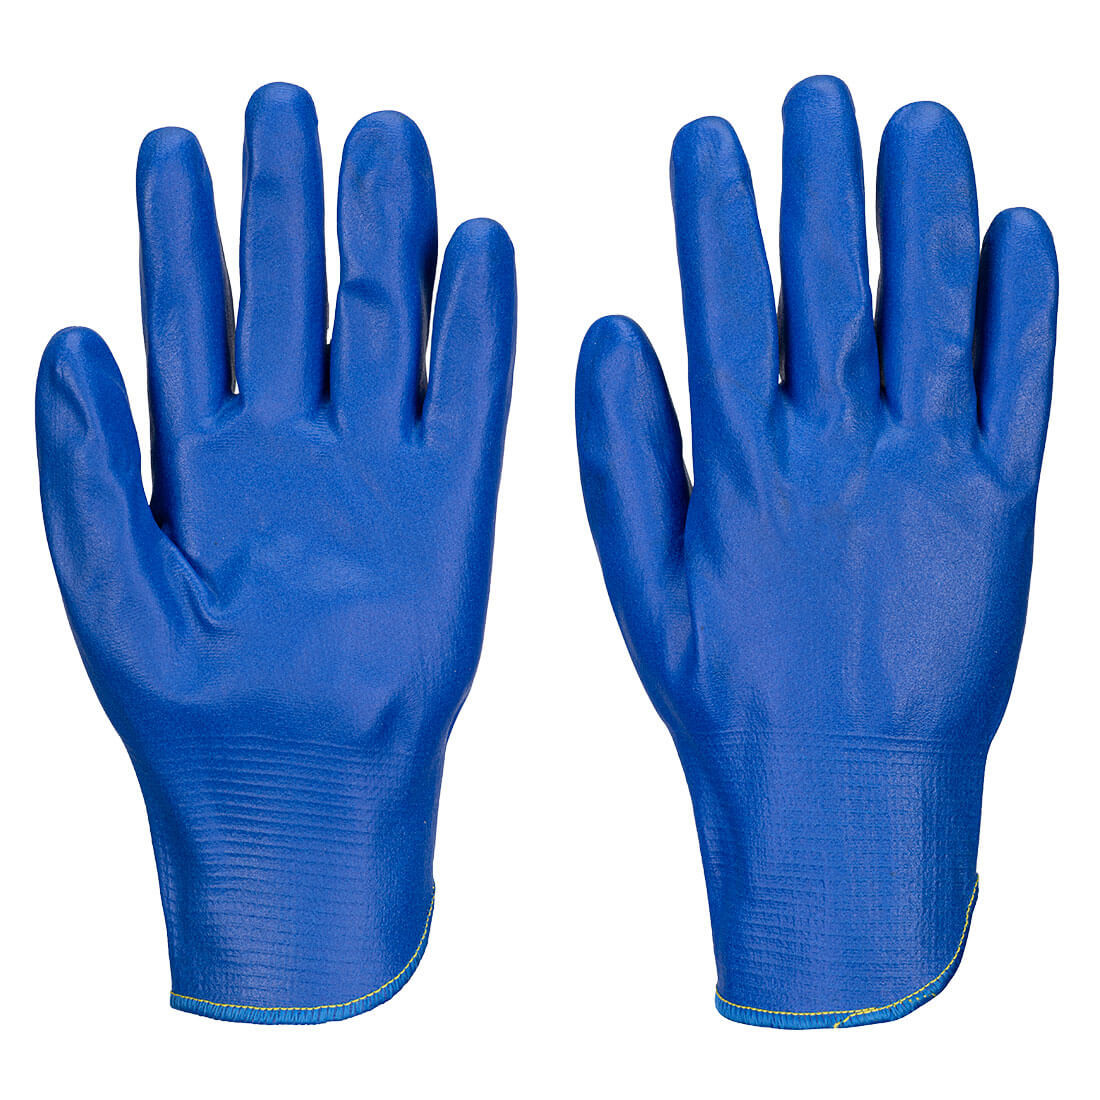 FD Grip 15 Nitrile Gauntlet - Personal protection